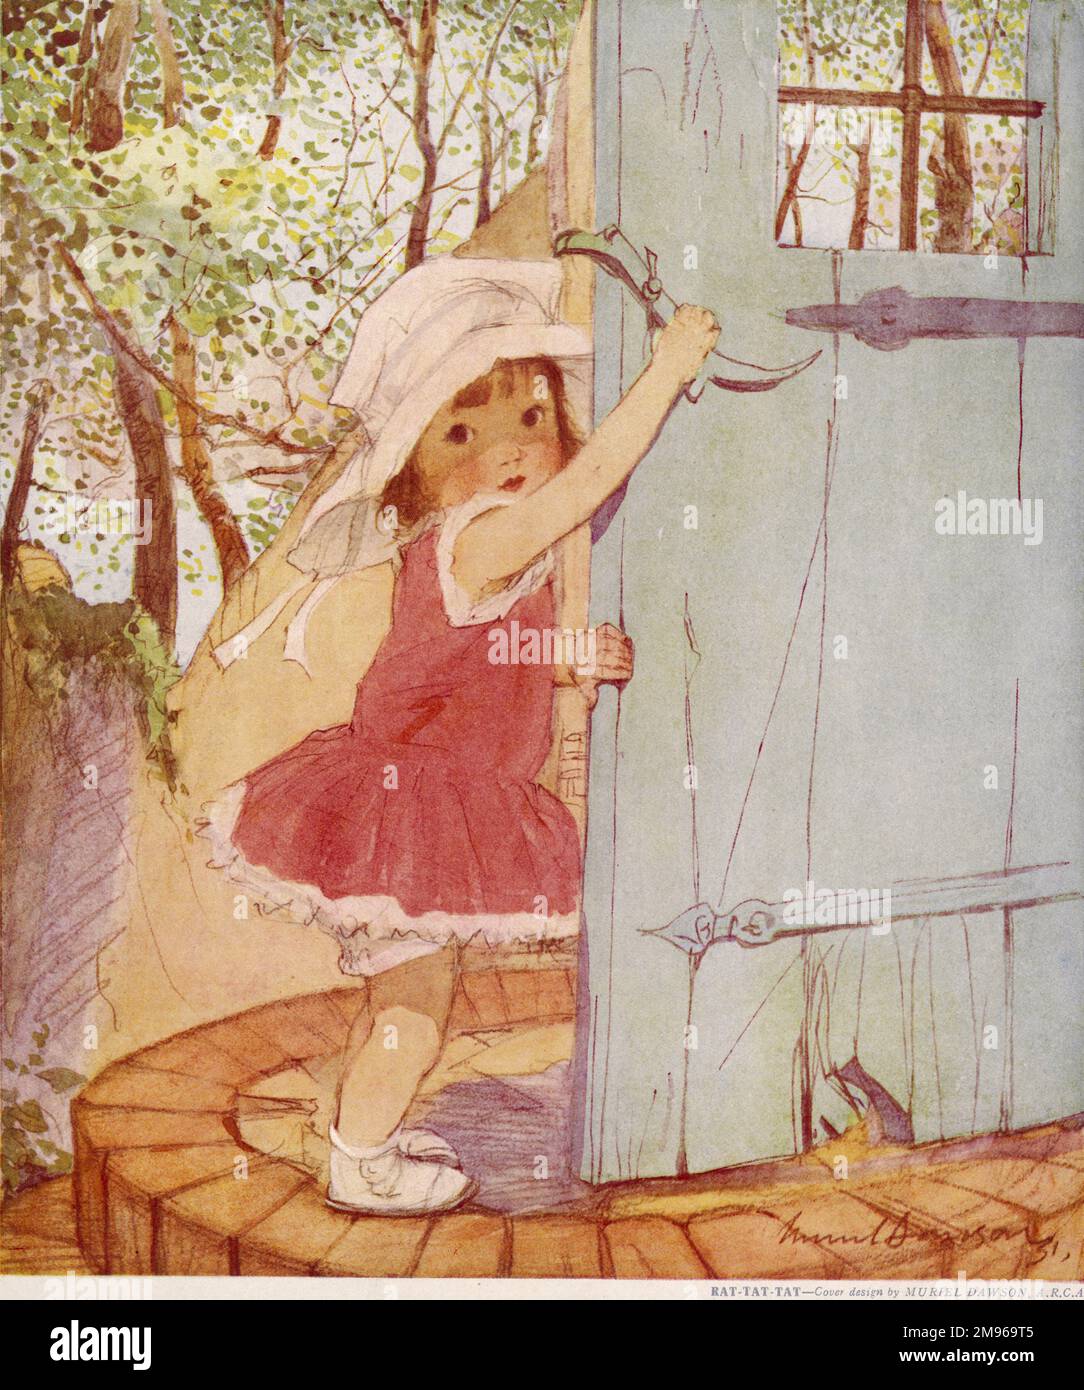 A sweet and engaging little girl in a red dress and wide-brimmed sun hat, opens a door using an old-fashioned latch. Stock Photo